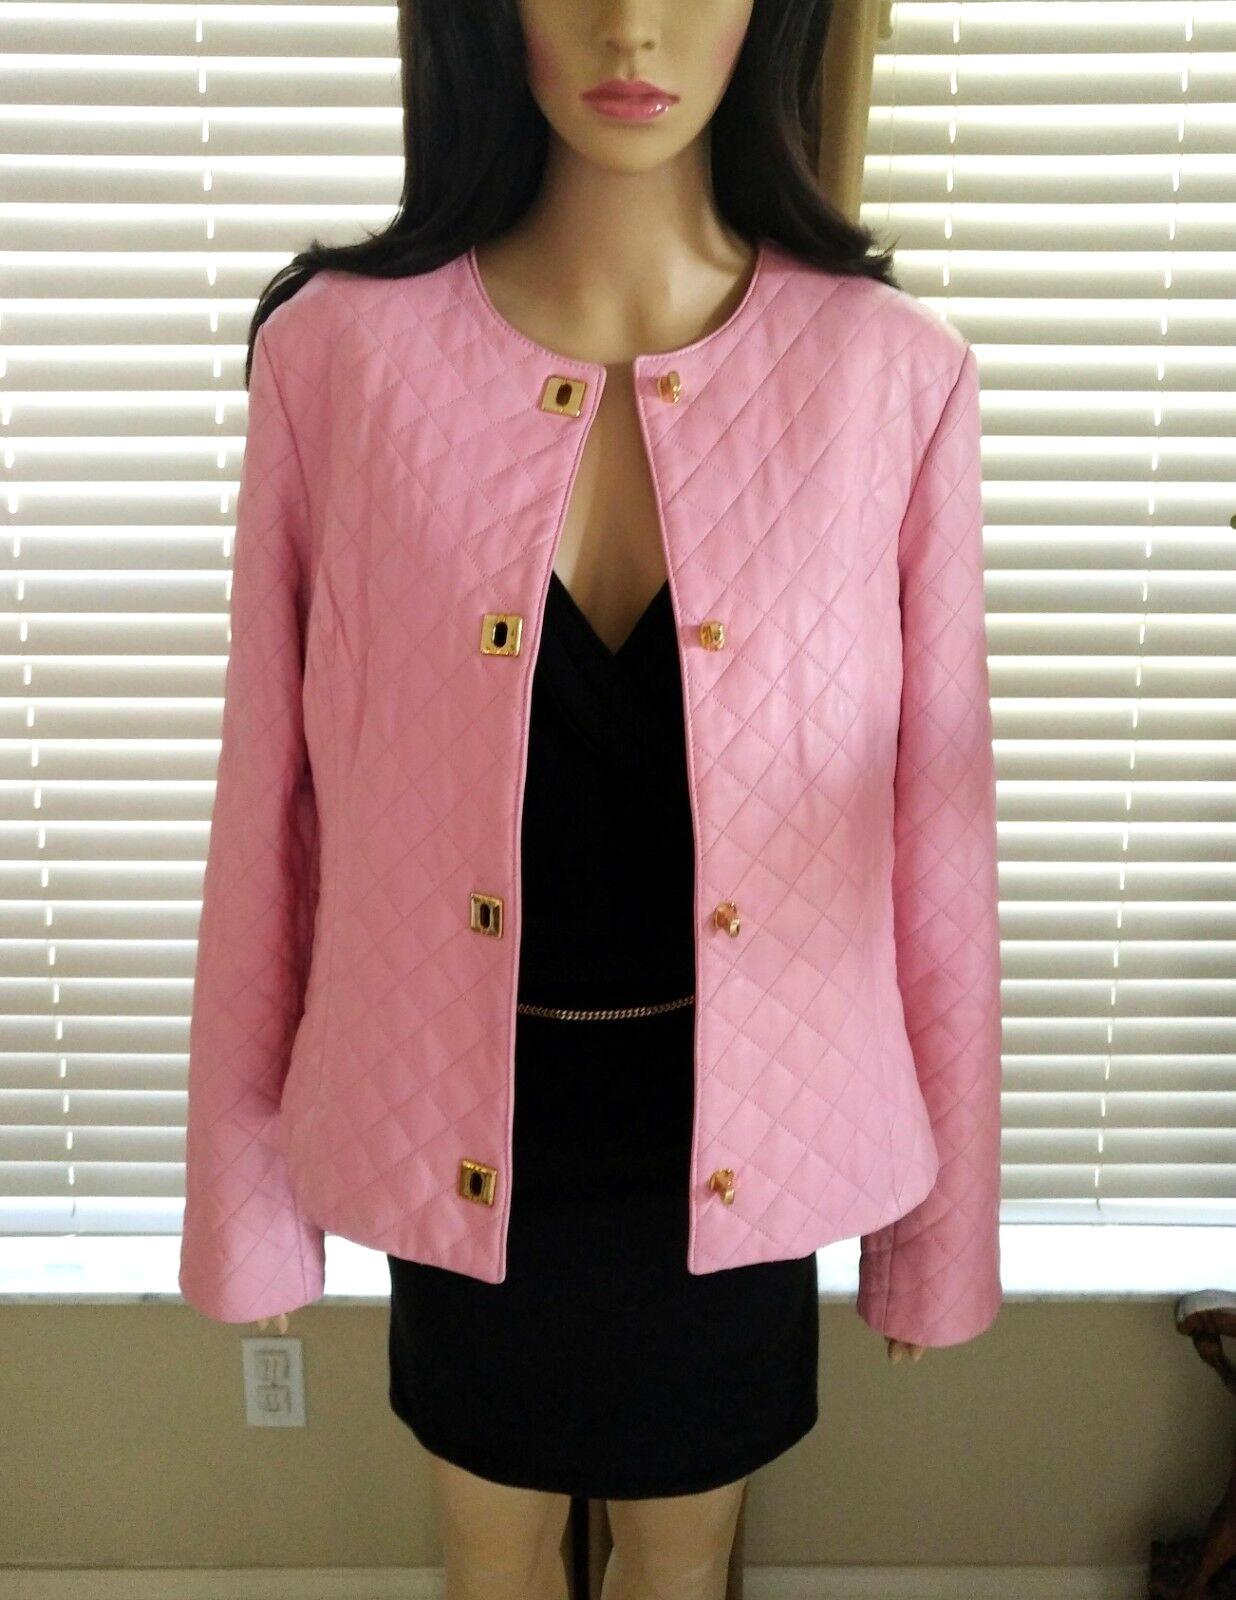  Gianfranco Ferre Petal Pink Quilted Lambskin Leather Jacket EU 38/ US 4 6 For Sale 8